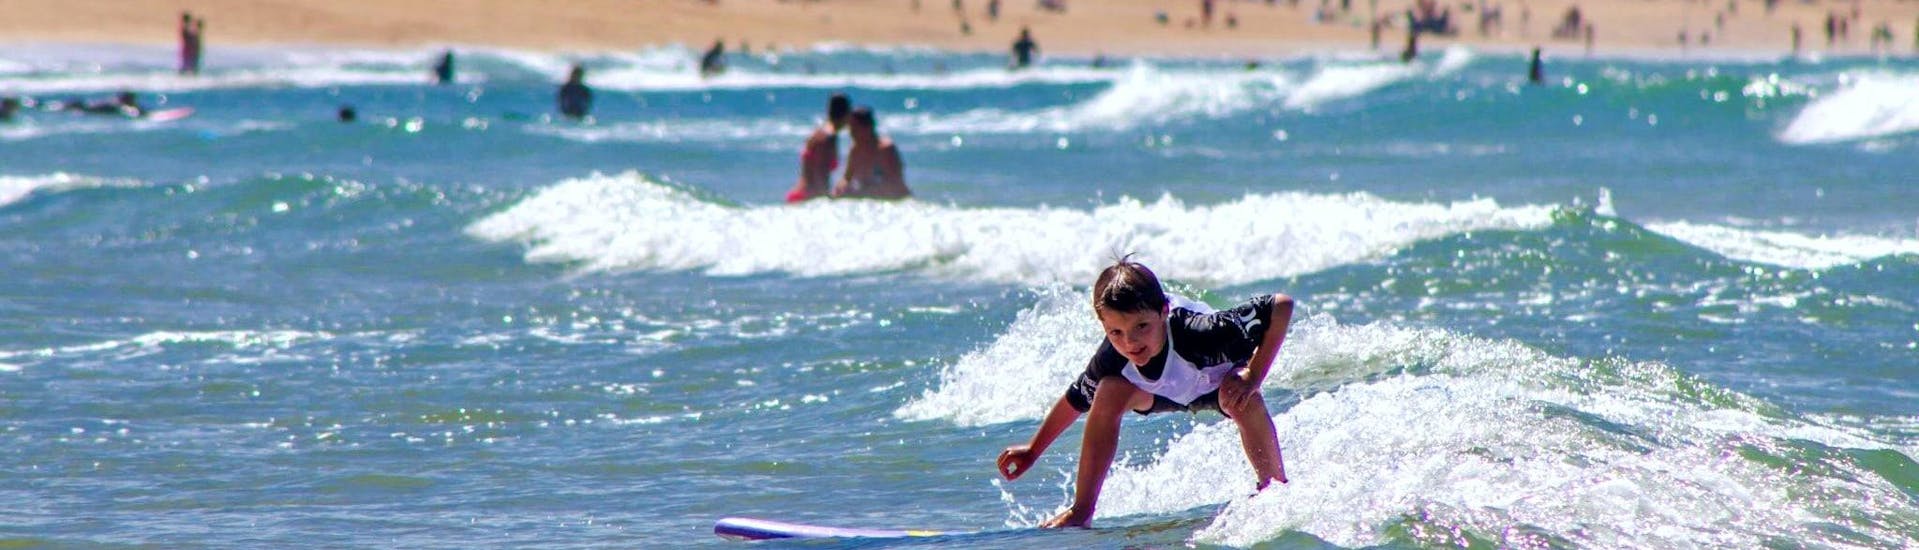 A young kid is surfing a wave thanks to his Private Surfing Lessons - Culs Nus Beach - All Levels with Hossegor Surf Center.